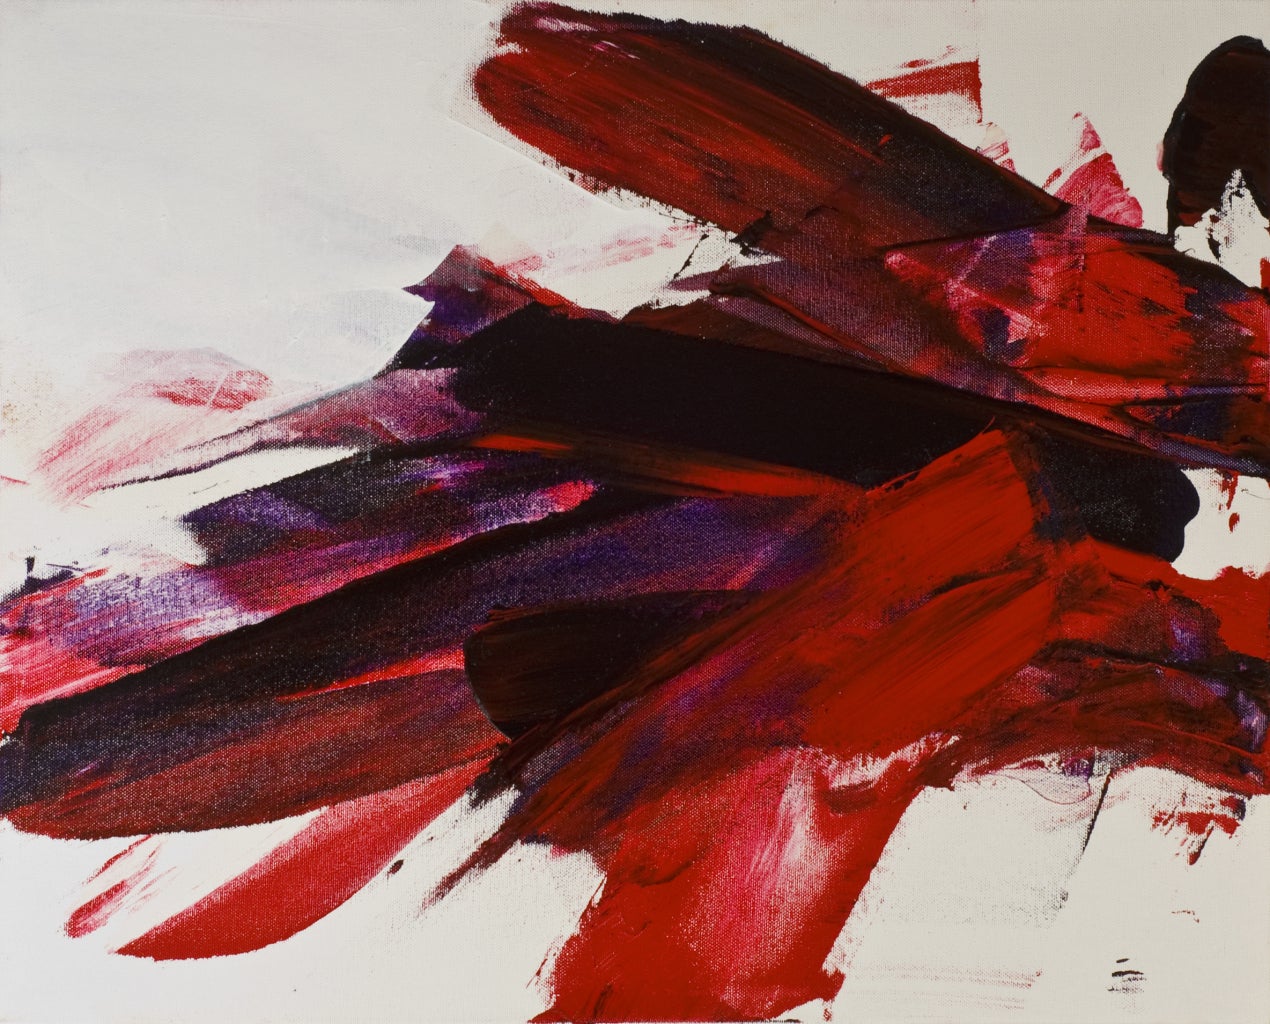 Luis Feito López Abstract Painting - Luis Feito, Abstract Red and Black, Oil on canvas, 2568